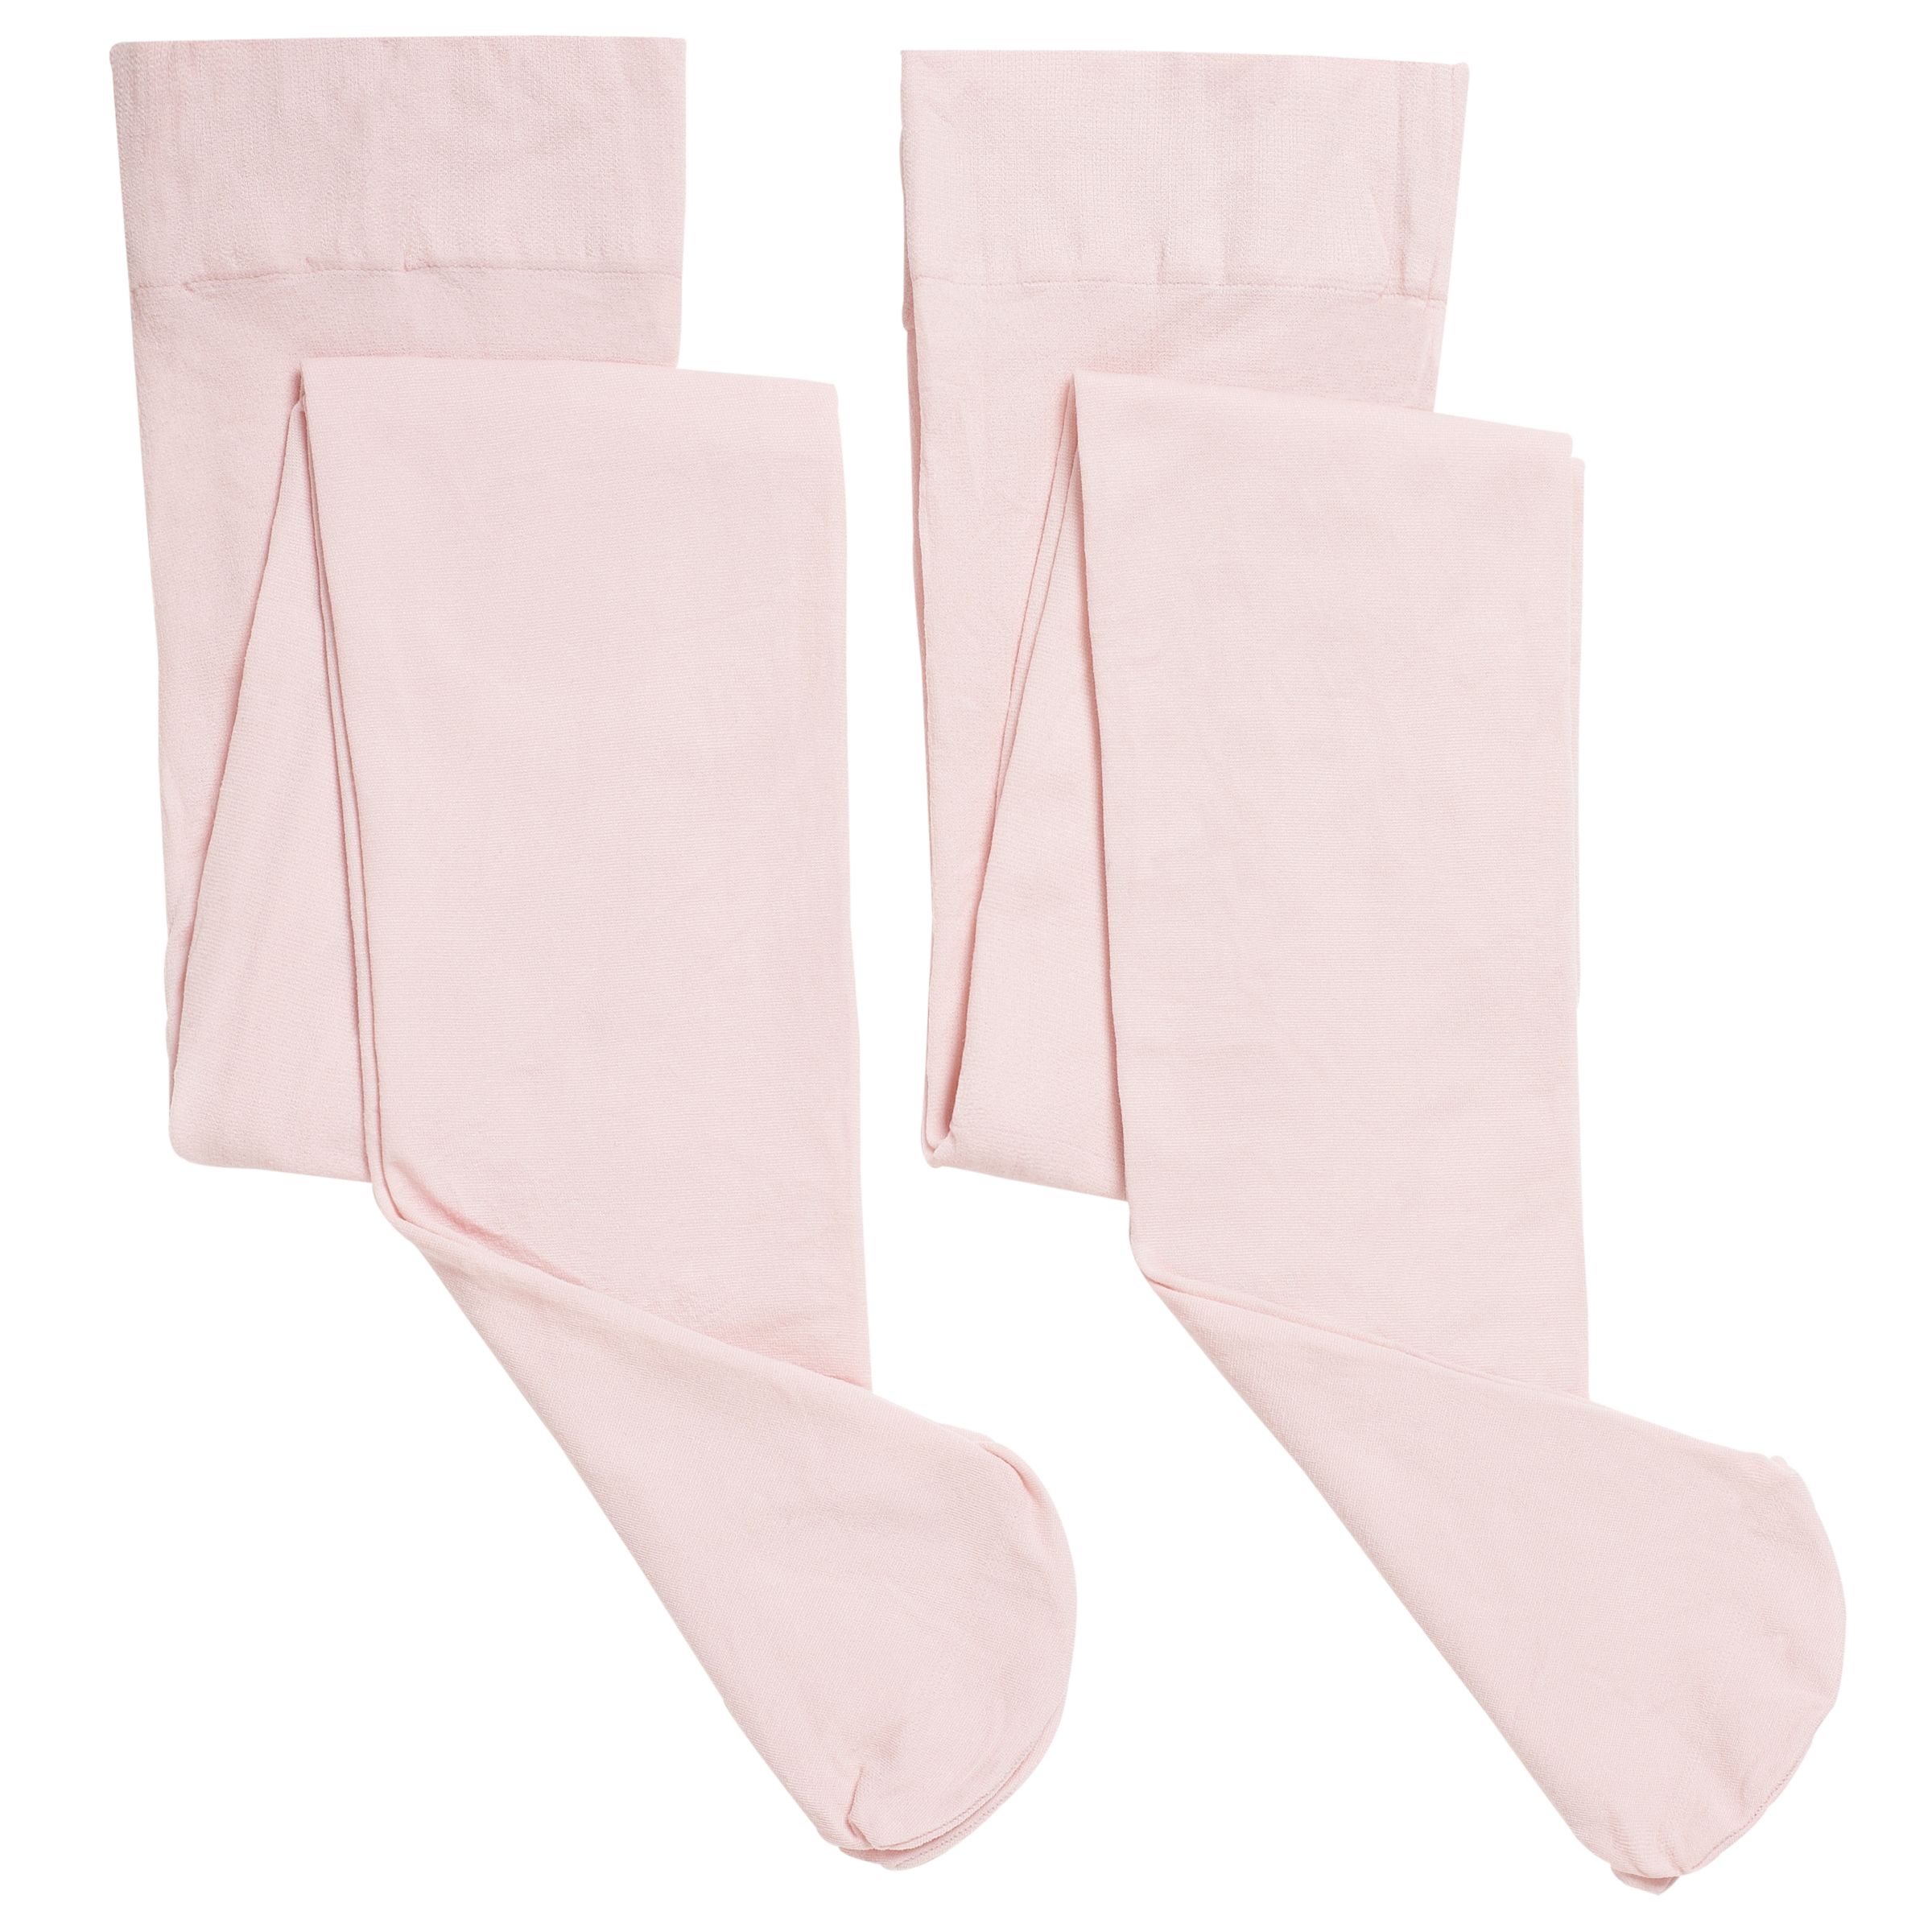 John Lewis ANYDAY Kids' Opaque Tights, Pack of 2, Pink, 5-6 Years